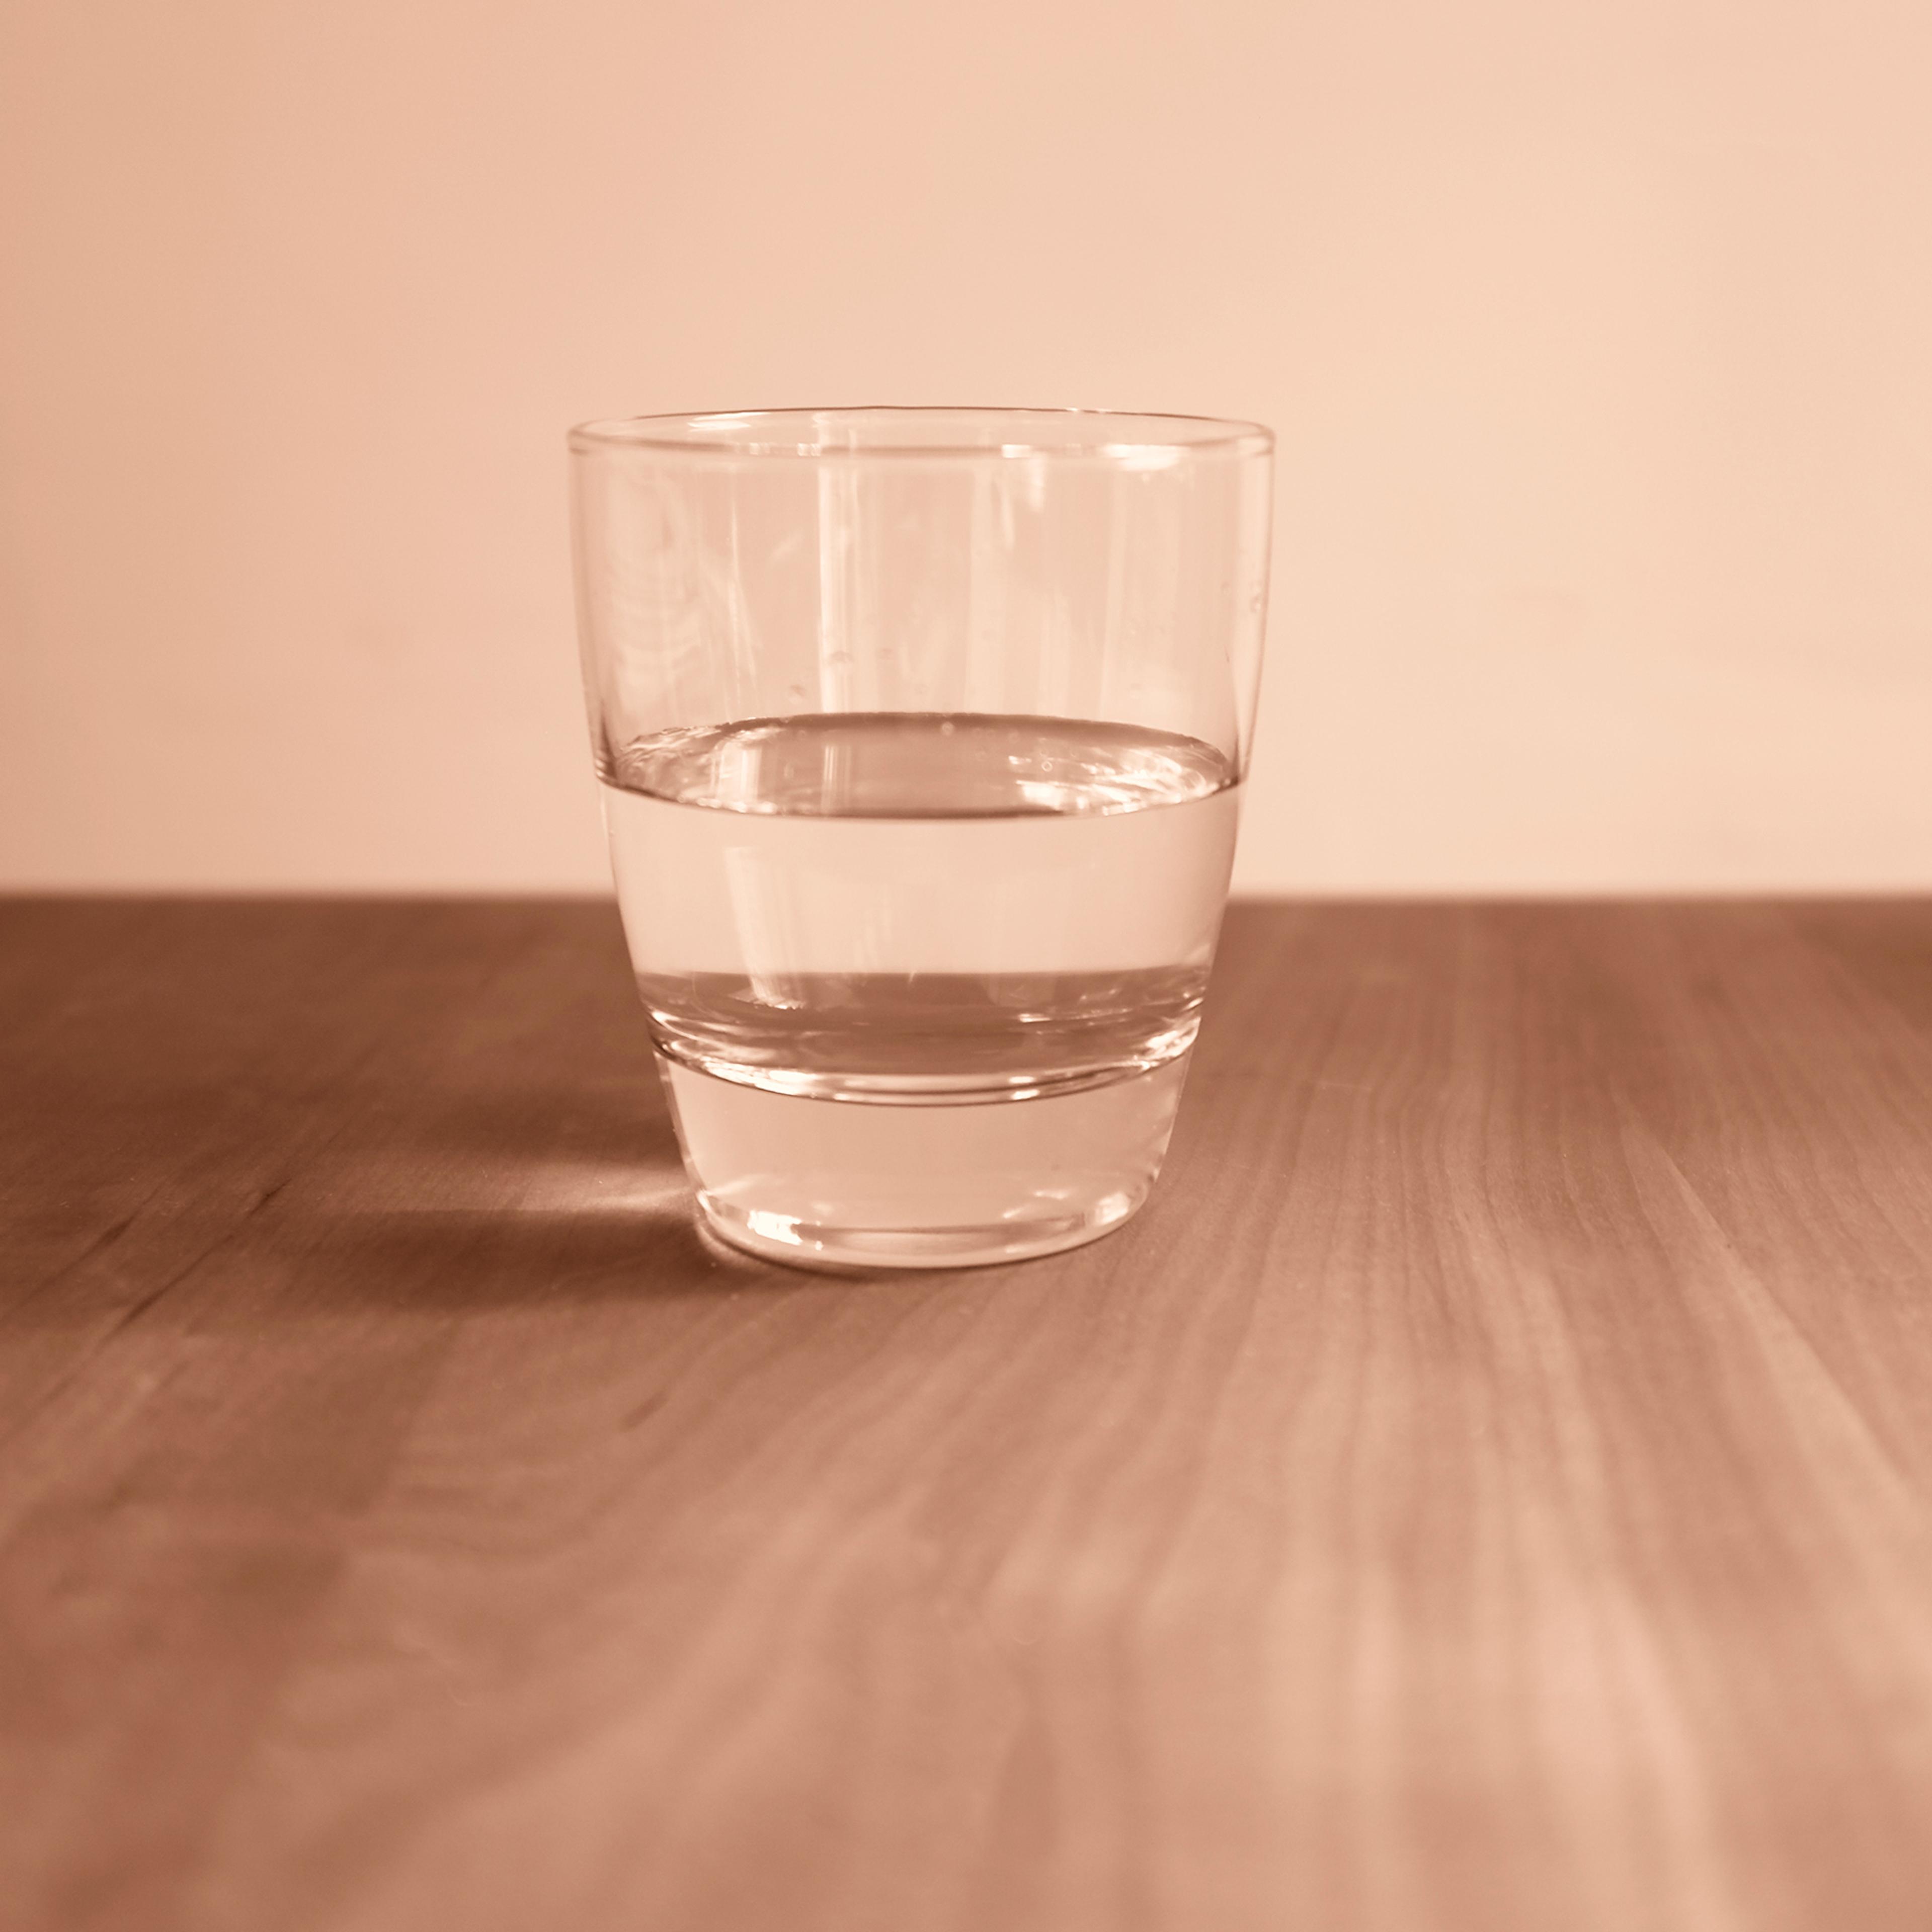 A clear glass, half-filled with water, placed on a wooden surface. The background is a plain, soft beige. The image has a warm, sepia tone.